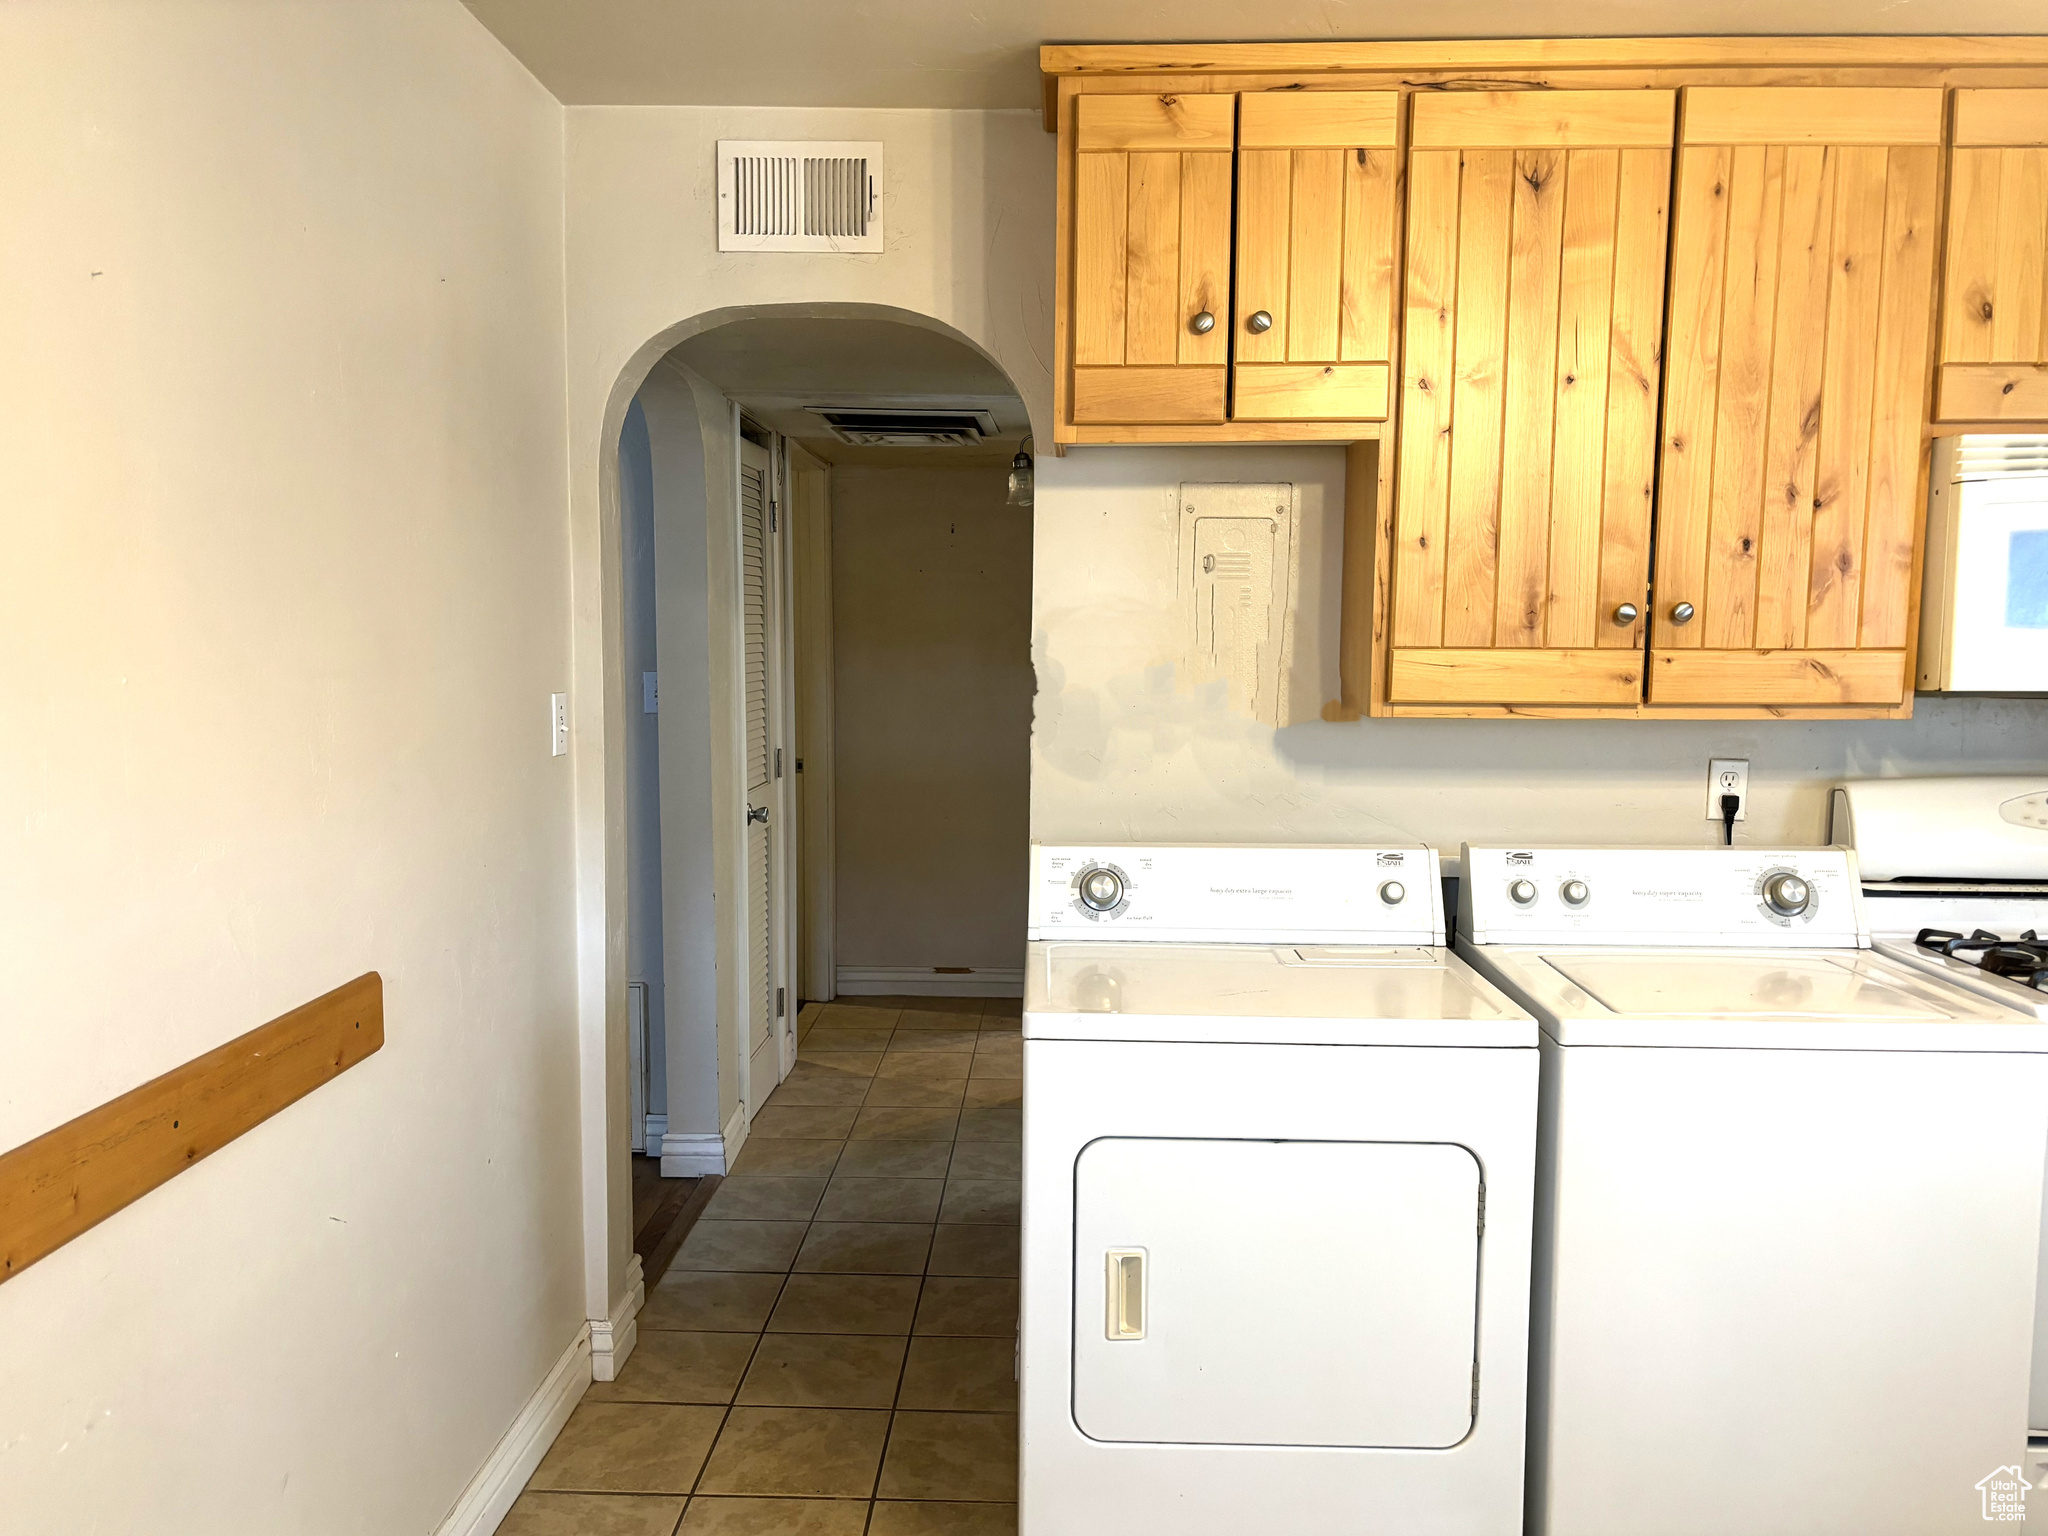 Clothes washing area with dark tile floors and washer and dryer in the kitchen.